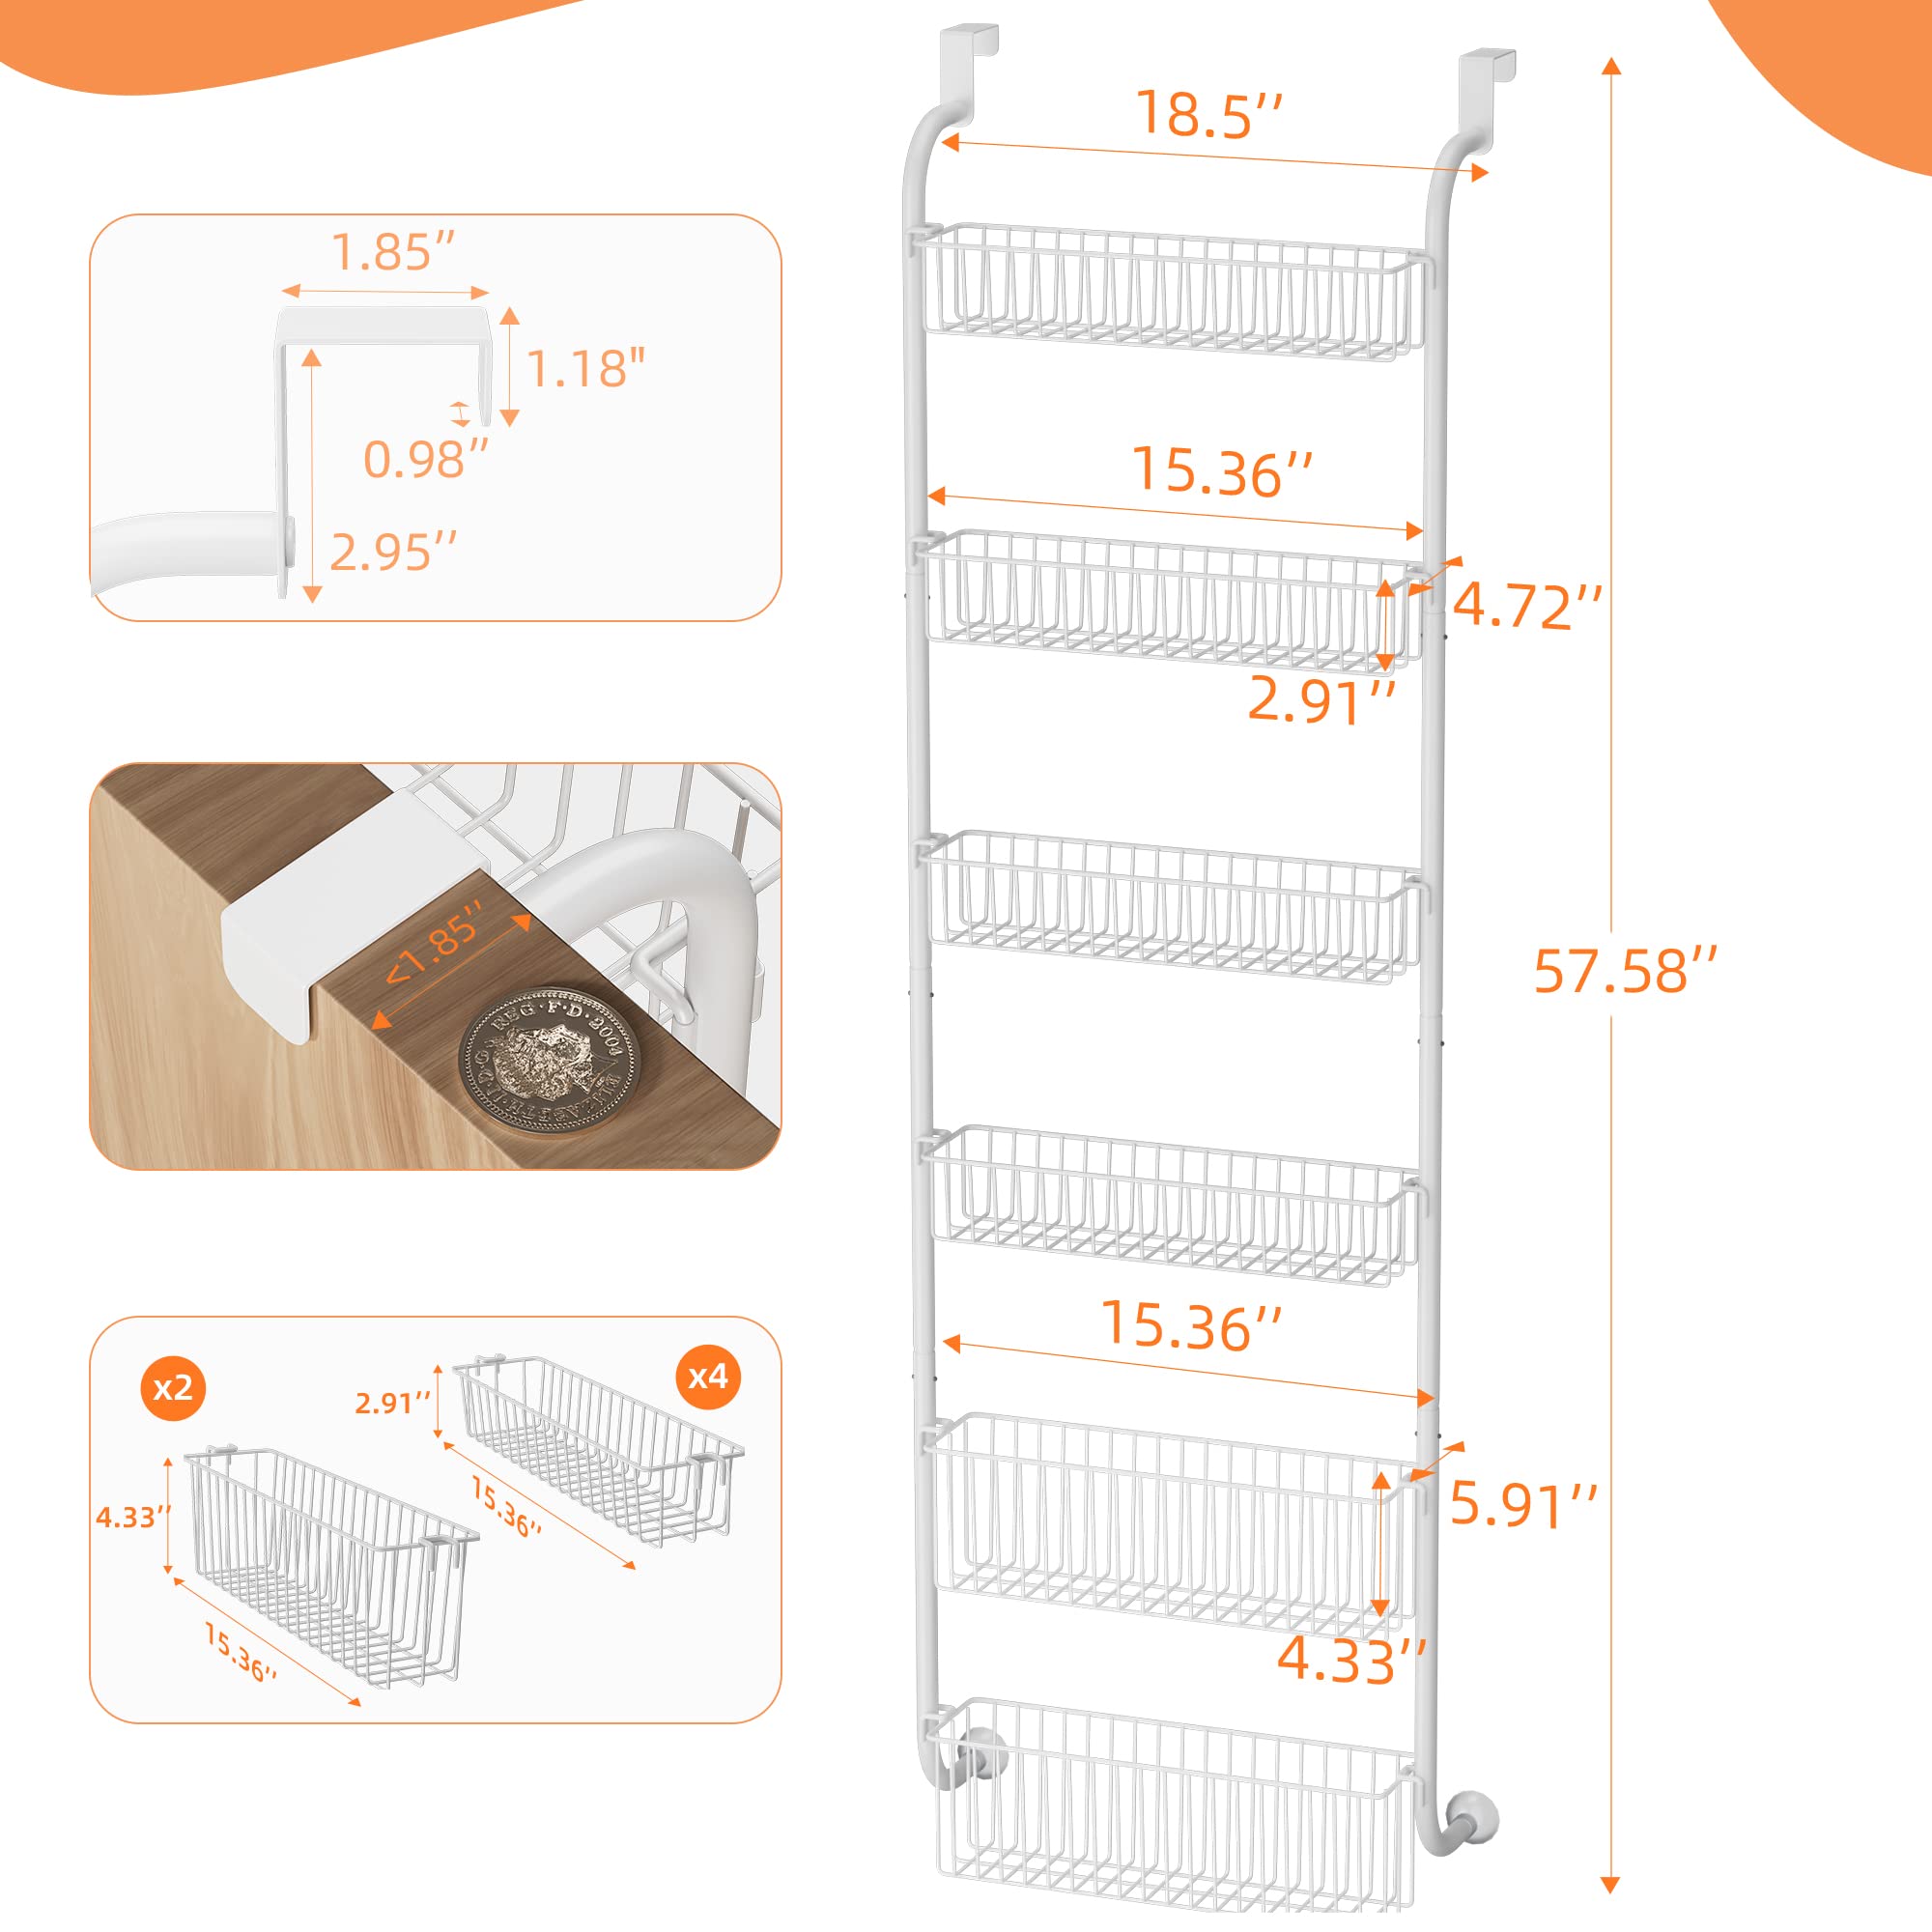 VIVSOL 6-Tier Over the Door Pantry Organizer with 4 + 2 Full Baskets, Heavy-Duty Metal Hanging Spice Rack for Pantry Door Organizer Kitchen Organizer Storage, Bathroom Organizer, Closet Storage, White